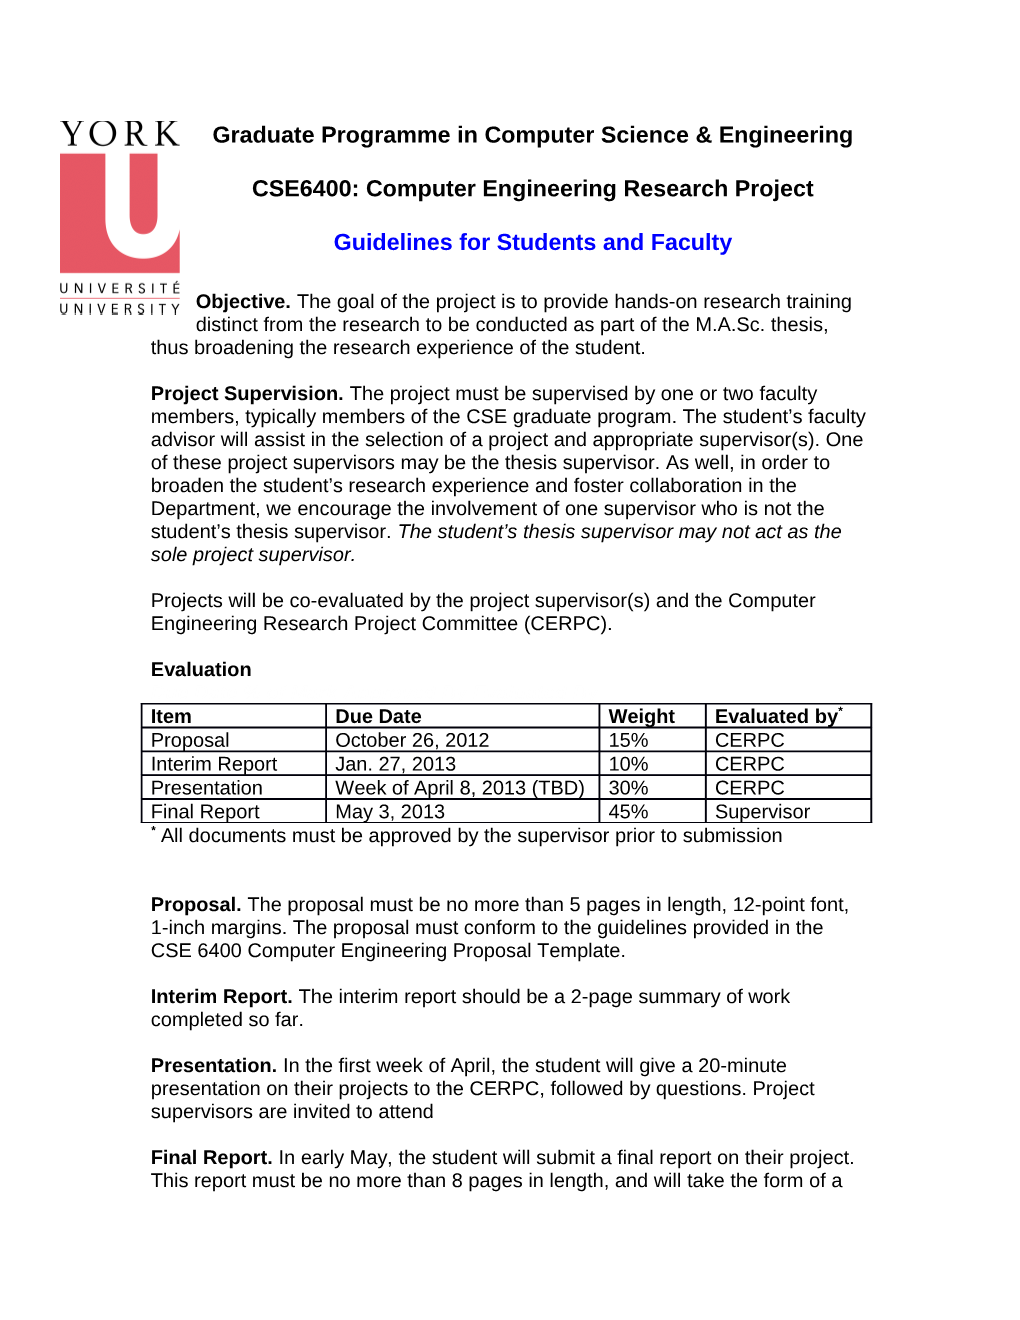 CSE6400: Computer Engineering Research Project